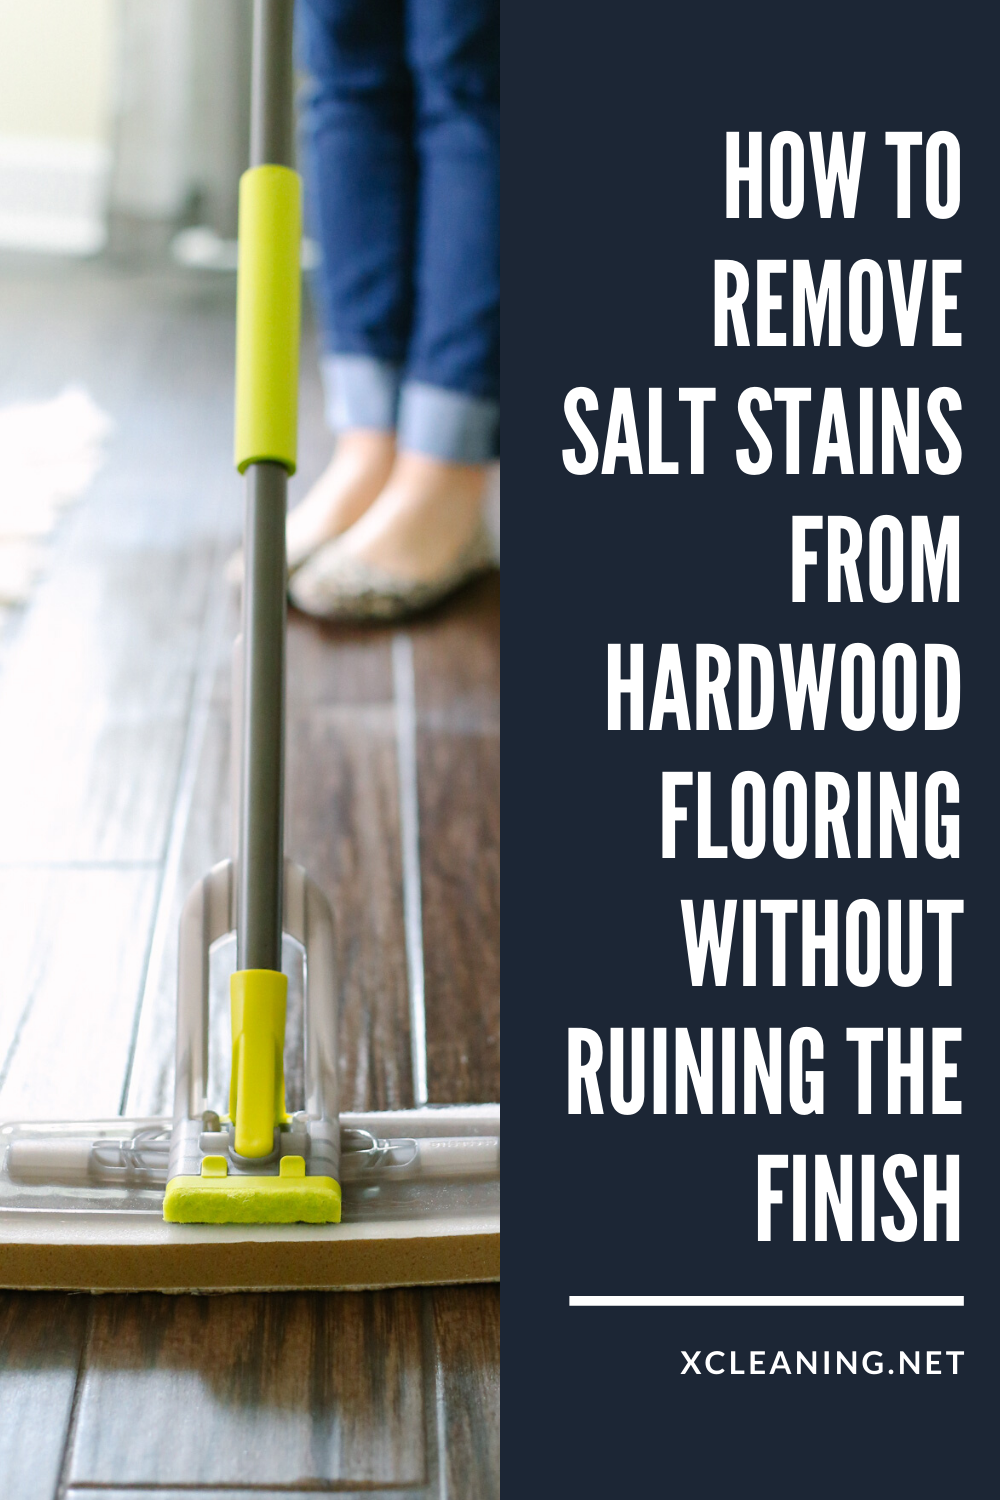 How To Remove Salt Stains From Hardwood Flooring Without ...